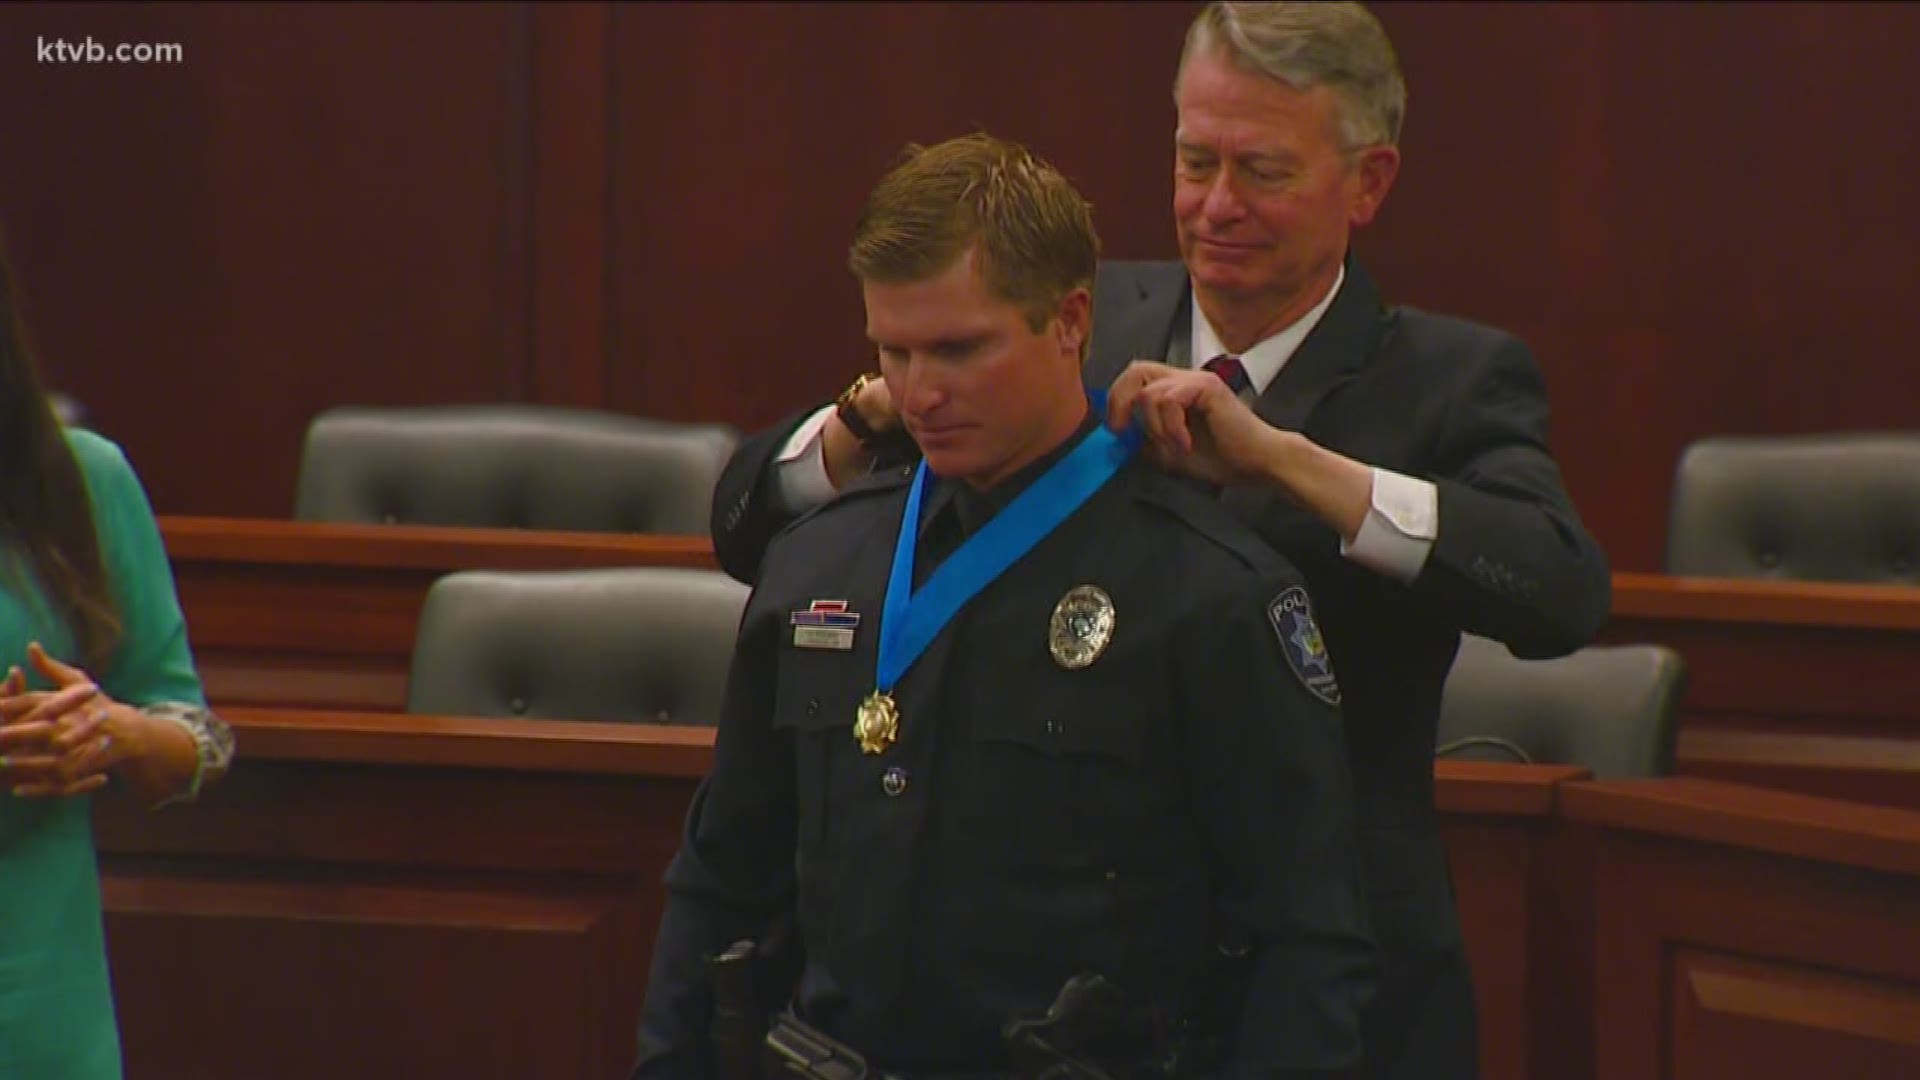 The Idaho Medal of Honor was awarded to six officers from the Treasure Valley.